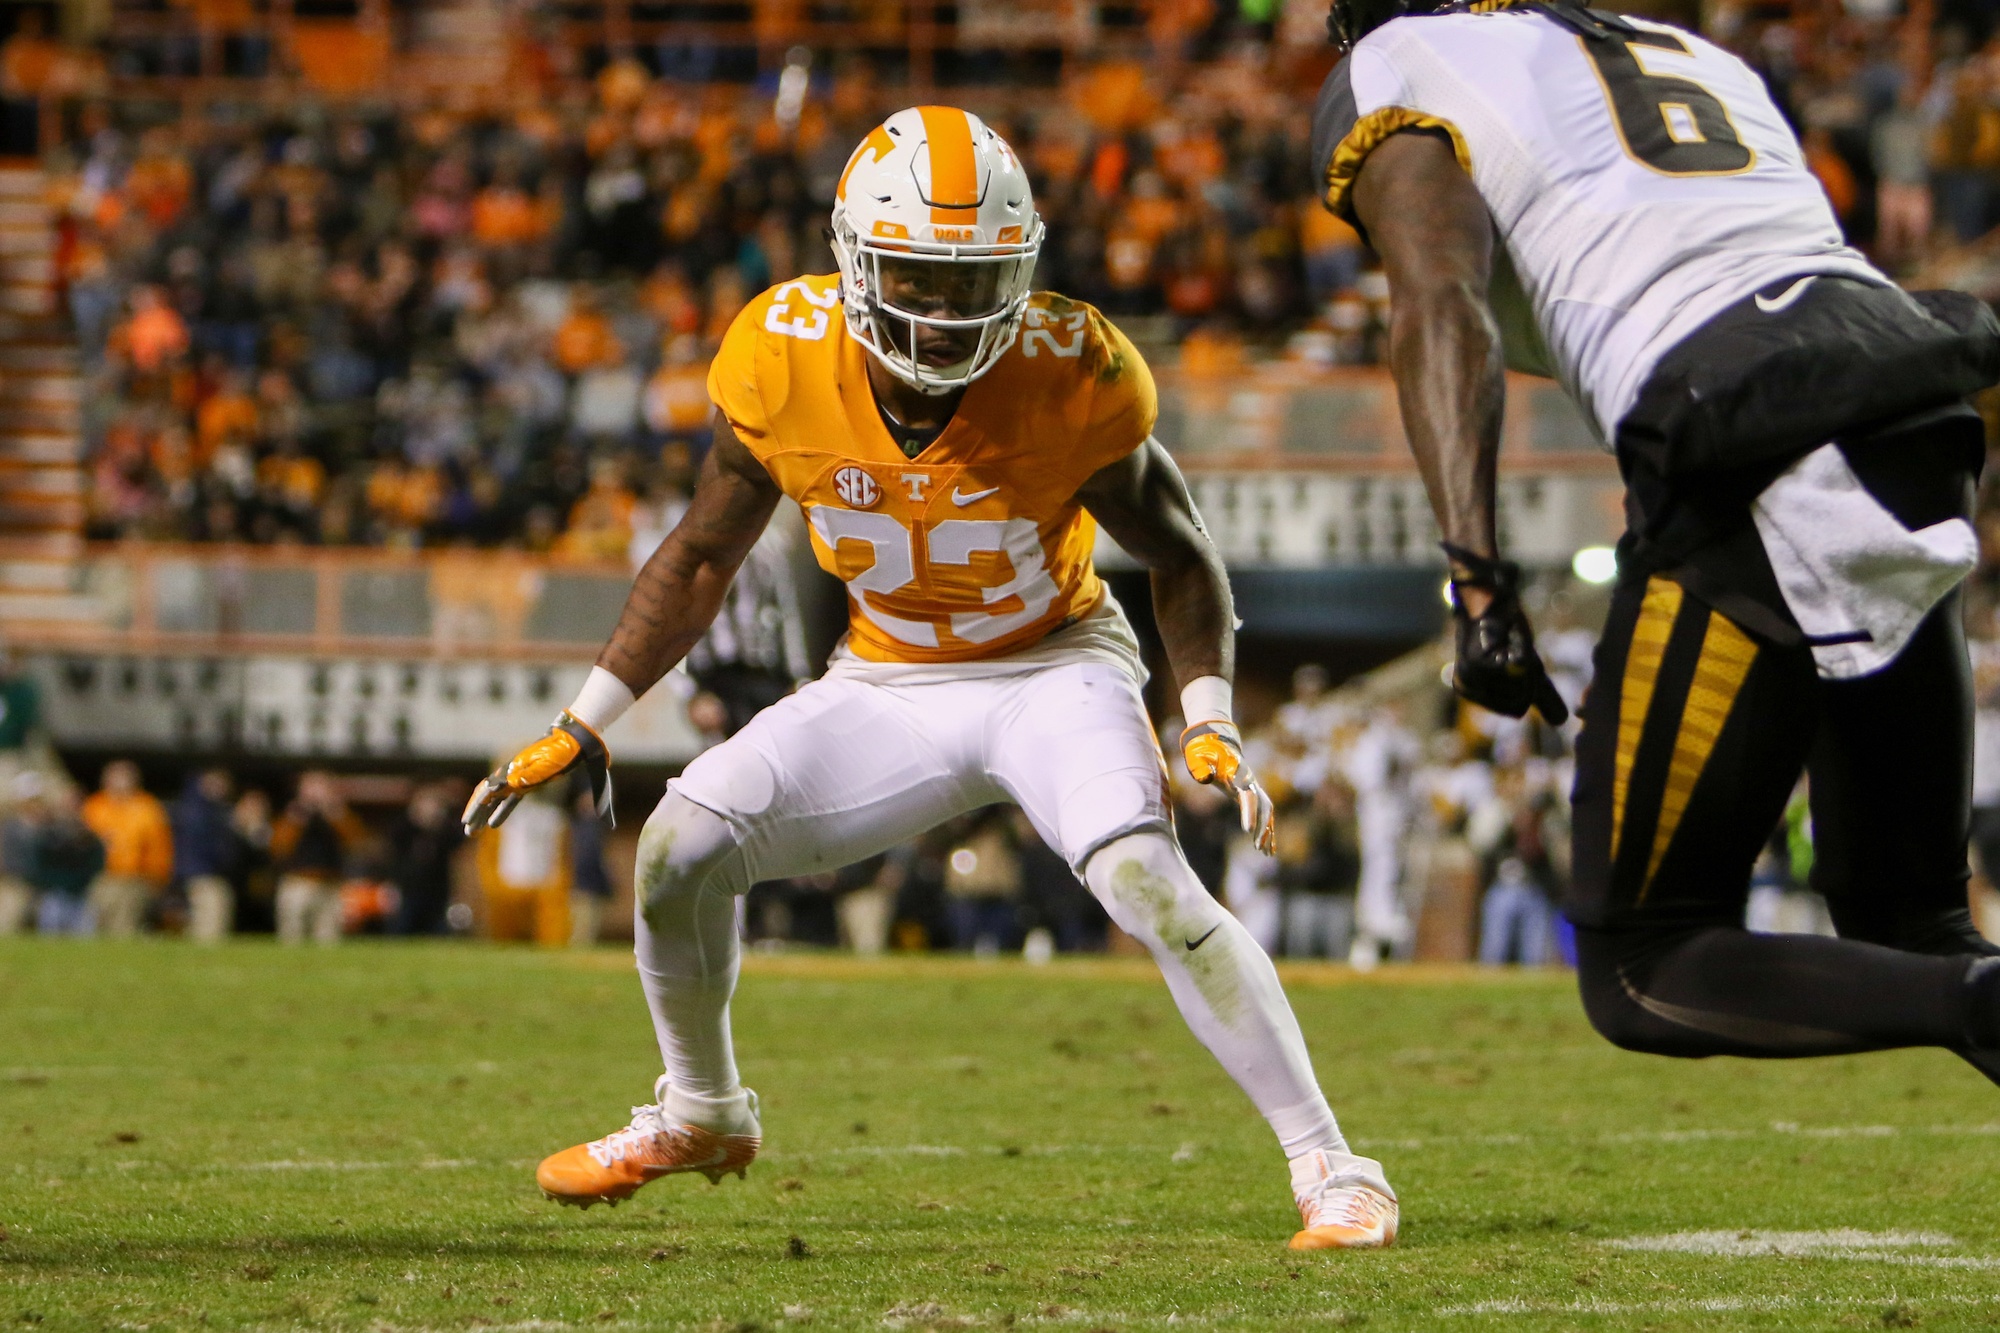 Nov 19, 2016; Knoxville, TN, USA; Tennessee Volunteers defensive back Cameron Sutton (23) defends during the second half against the Missouri Tigers at Neyland Stadium. Tennessee won 63-37. Mandatory Credit: Randy Sartin-USA TODAY Sports